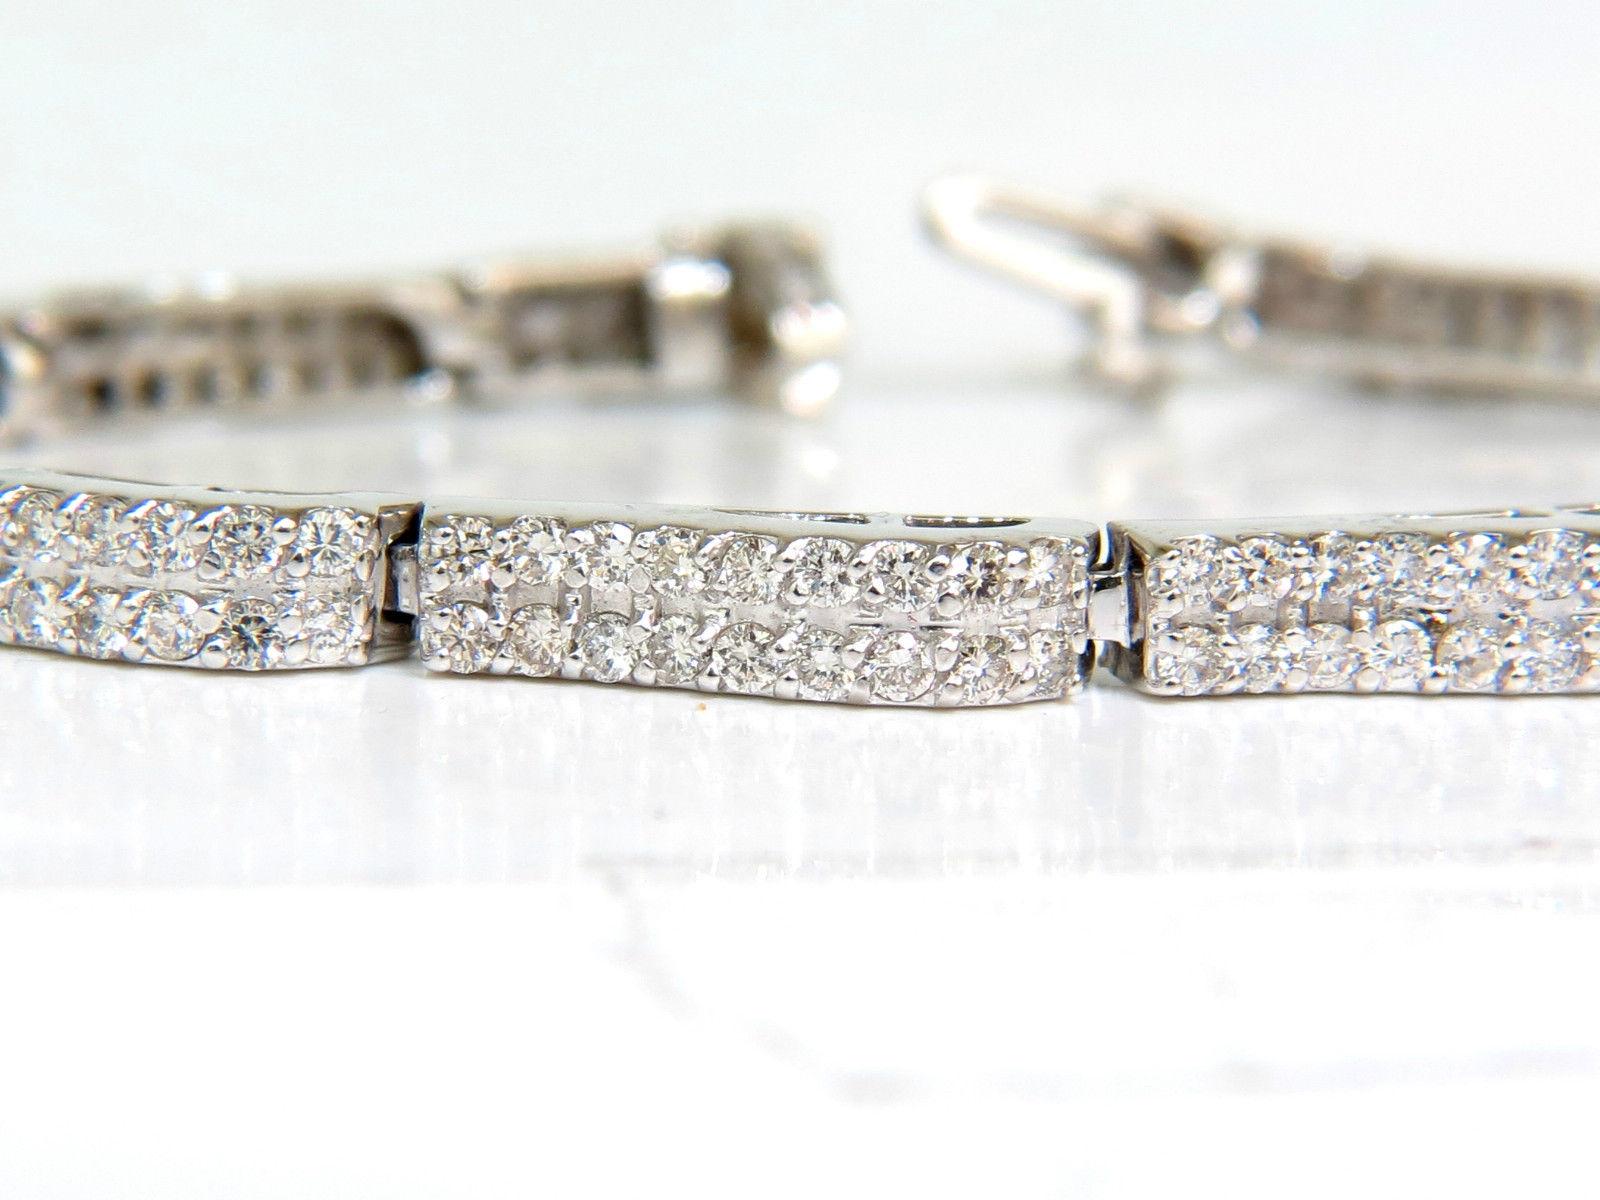 Waved link diamonds tennis bracelet.



3.50ct. diamonds.

Rounds, full cut.

H colors Si-1 clarity.

14kt. white gold

16.1 Grams.

7 Inches long

4.1mm wide

pressure clasp and safety catch.

Appraisal to accompany $9,500